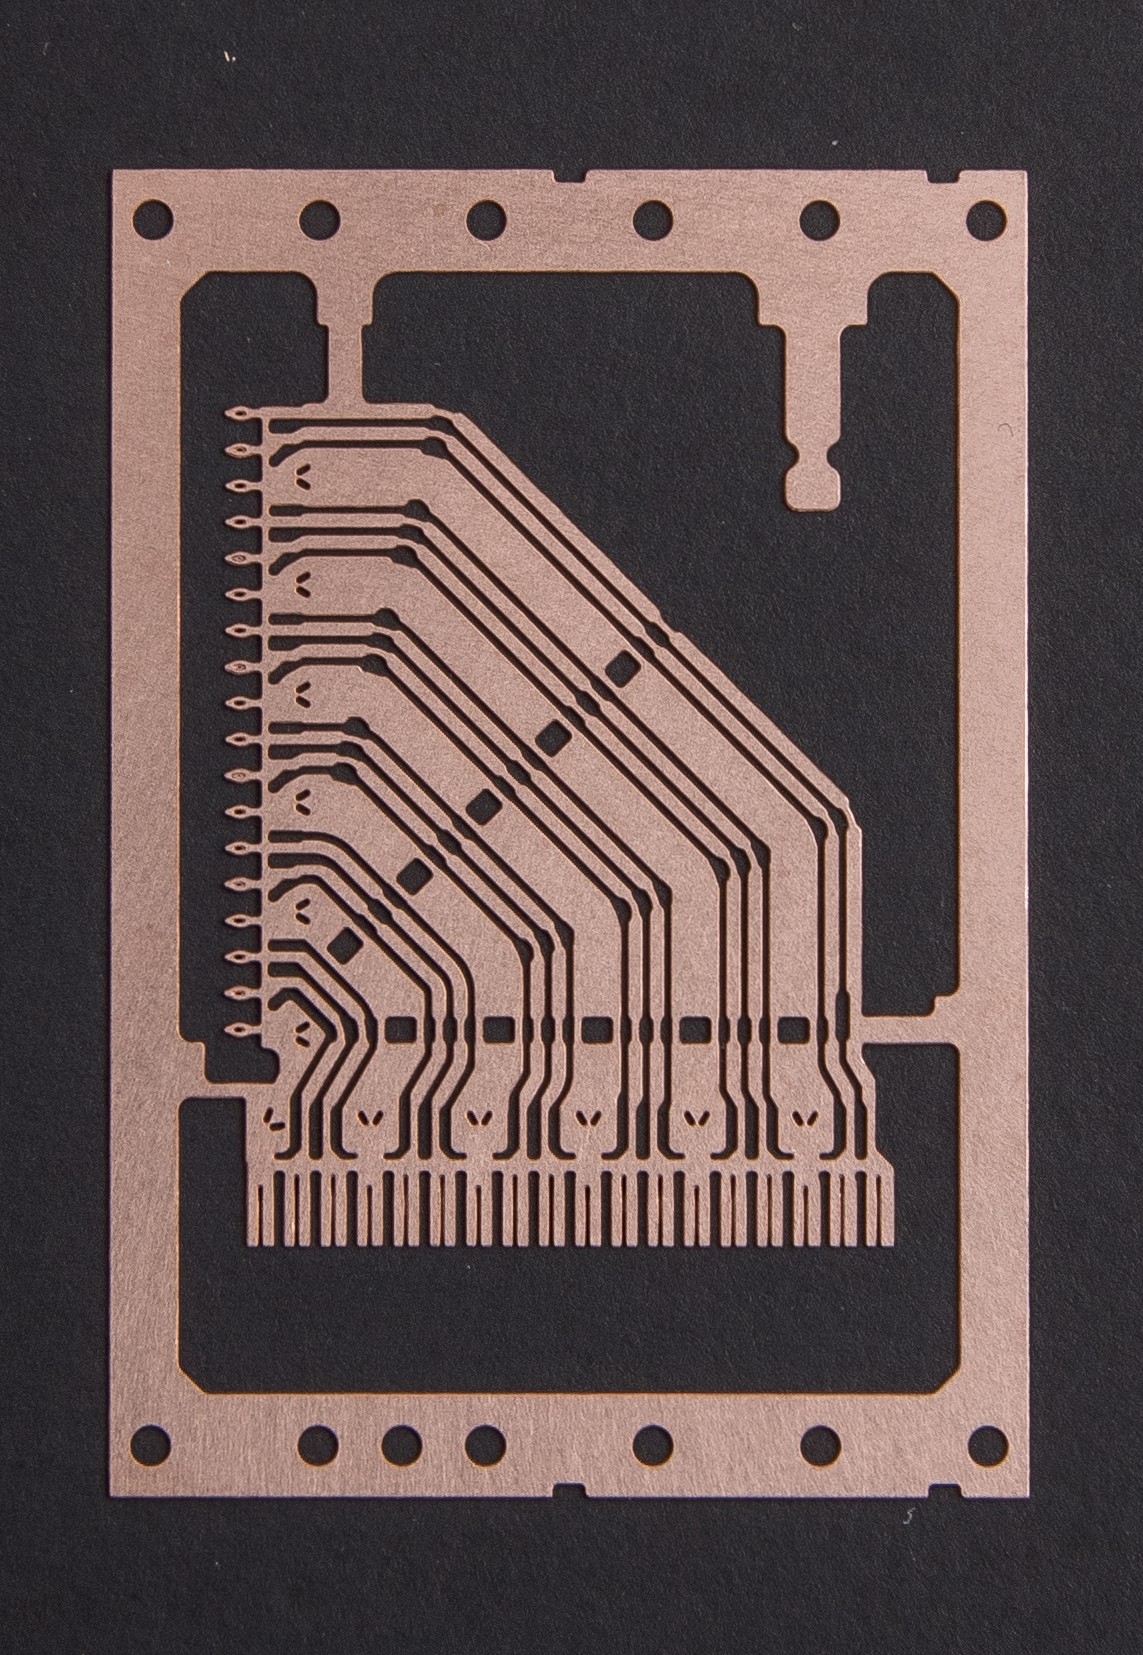 gallery etching flex circuits